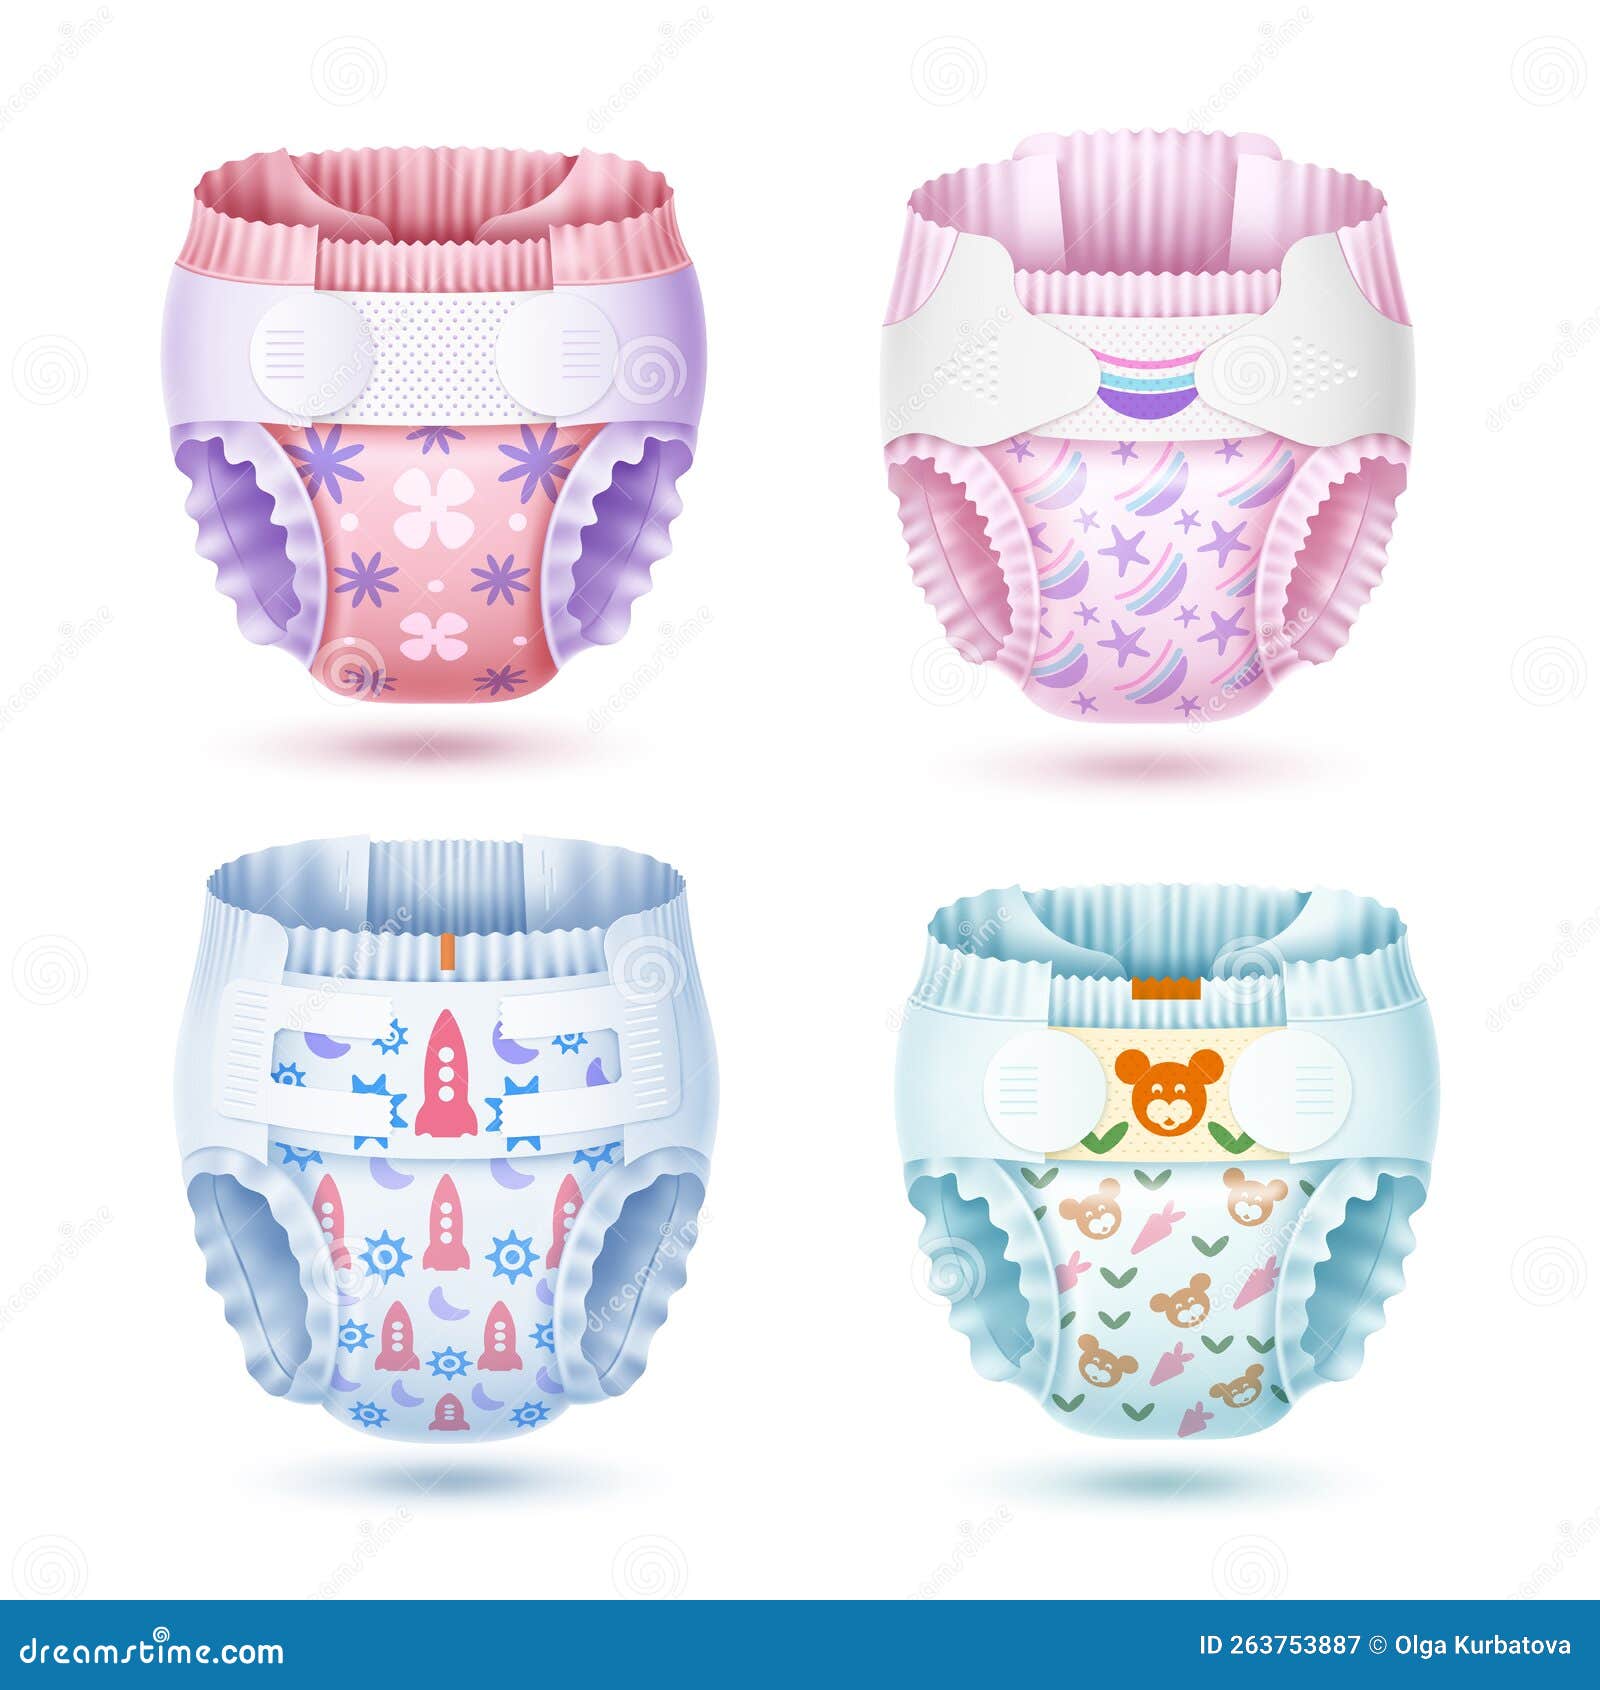 baby diapers . realistic cotton absorbent panties with velcro, different kids patterns, girly and boyish colors